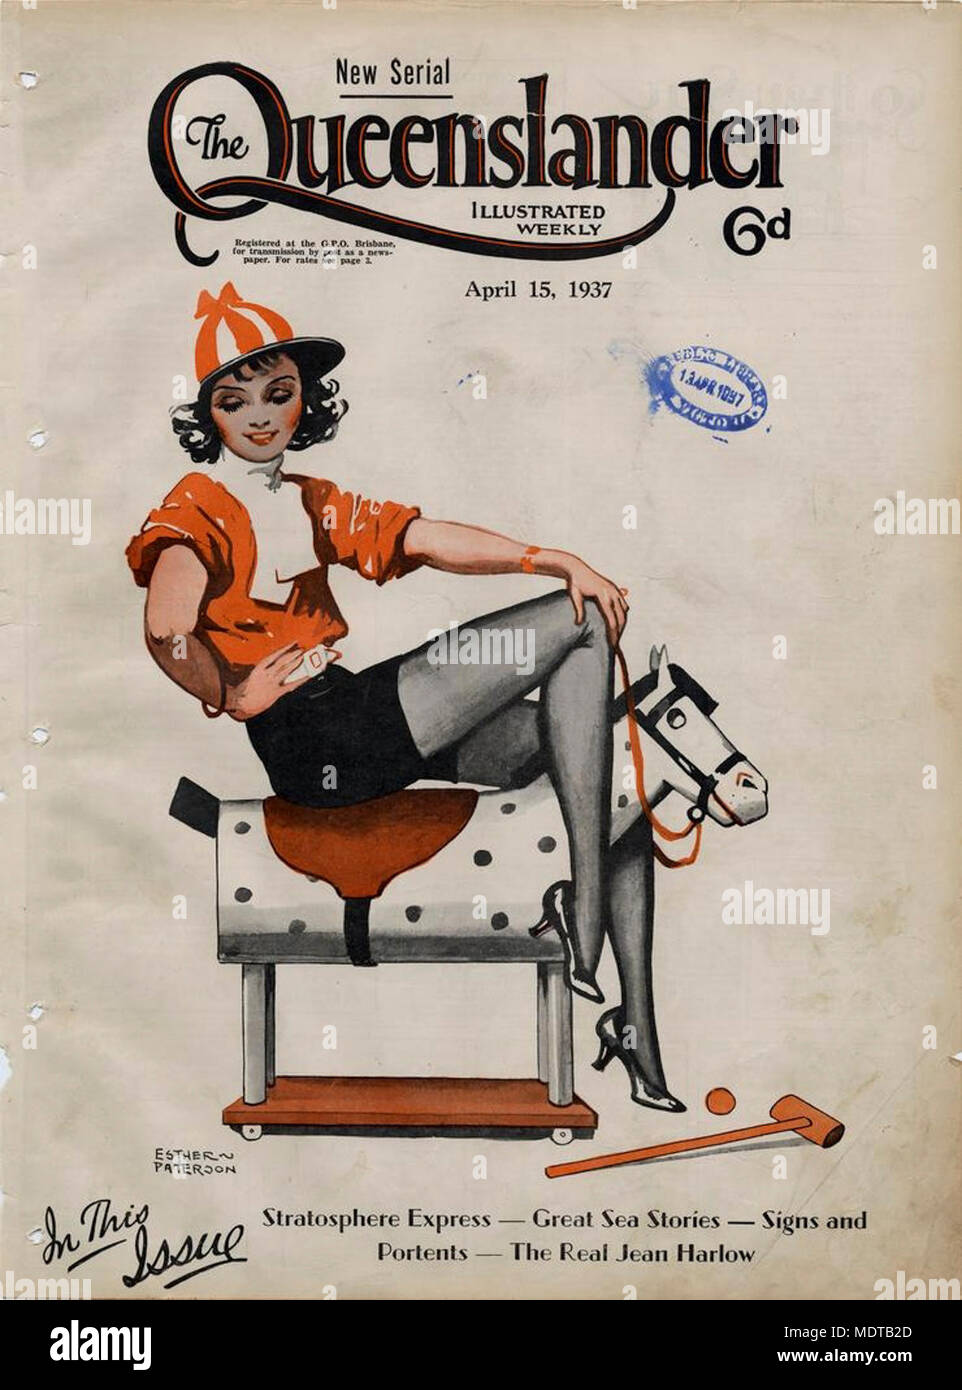 Illustrated front cover from The Queenslander, April 15, 1937. Location: Queensland, Australia  Description: A coloured drawing of a woman posing on a toy wooden horse with possibly a polo mallet and ball on the floor. Stock Photo